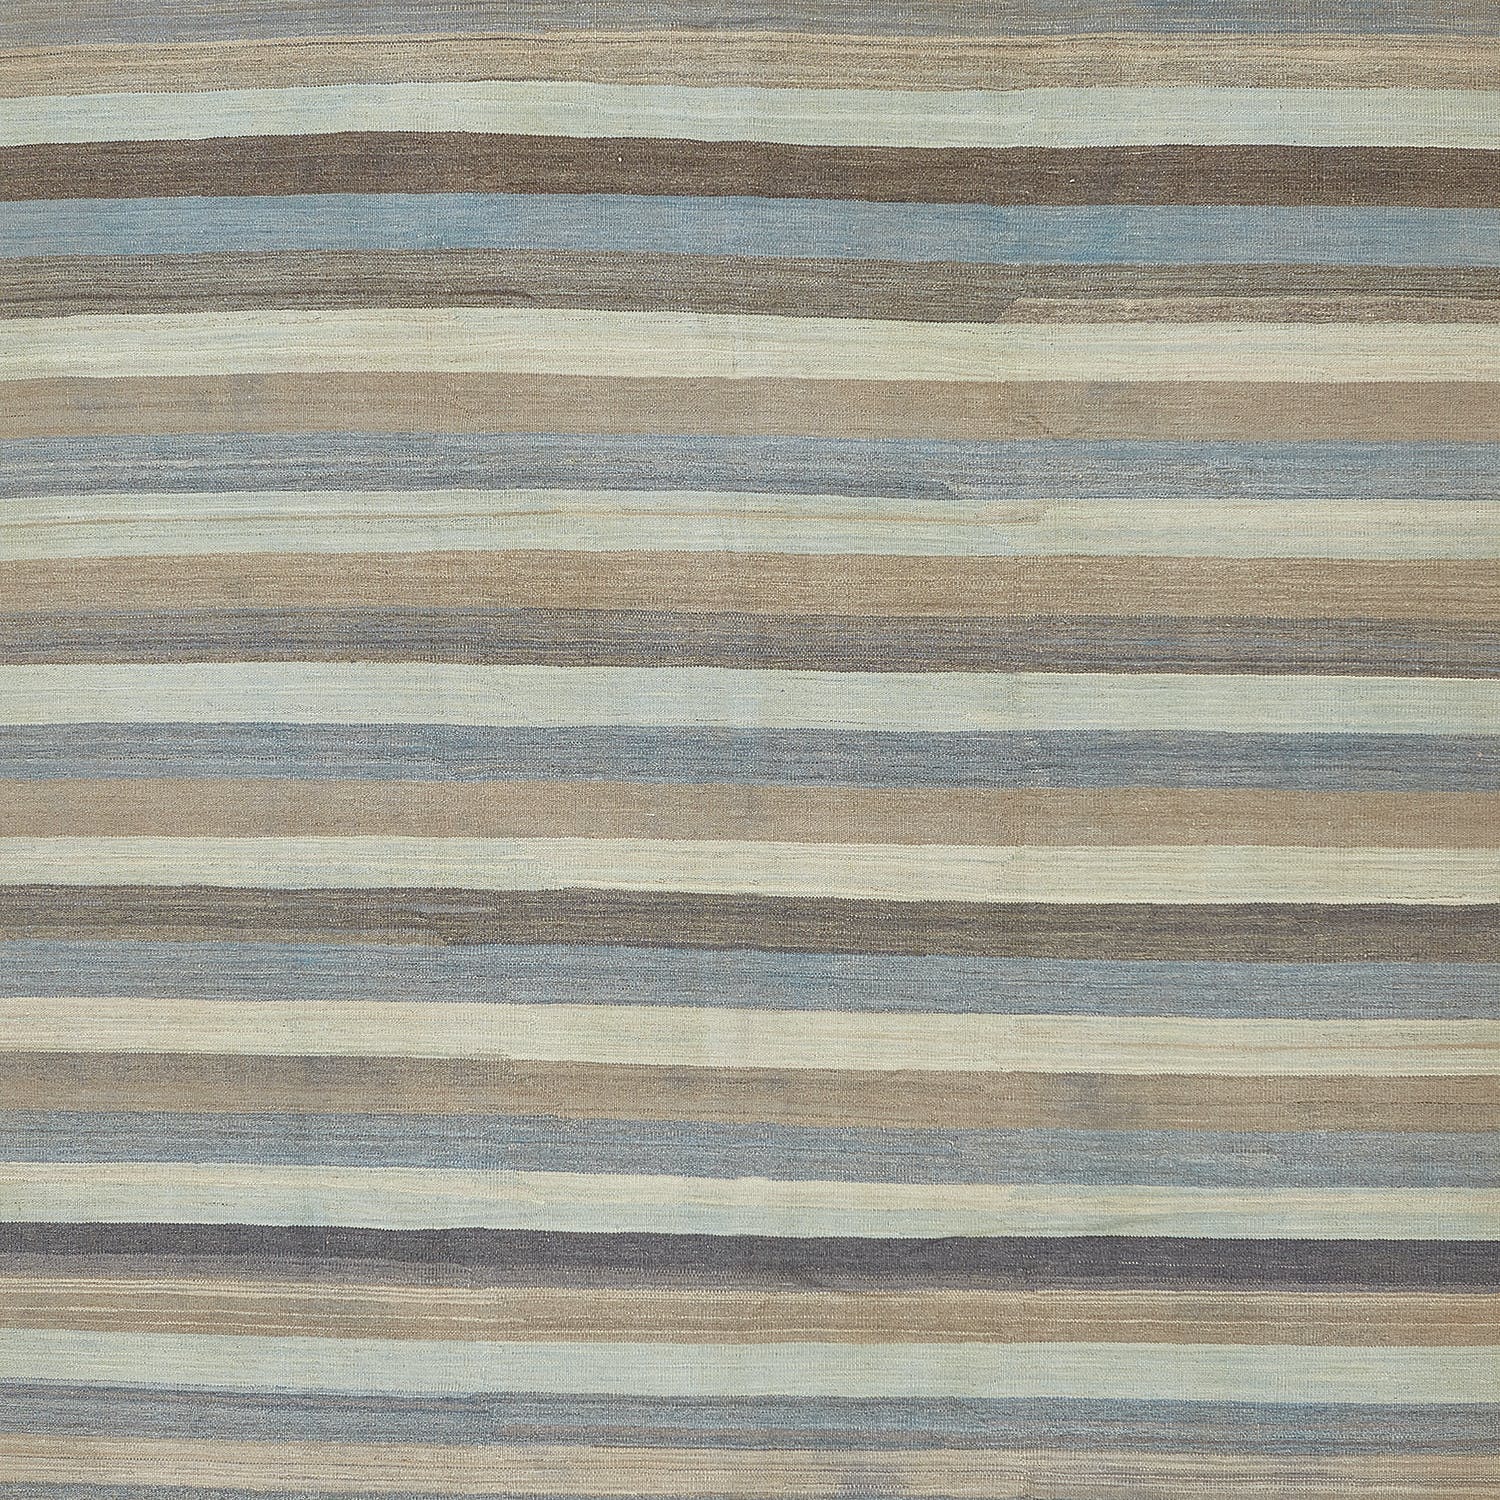 Horizontal striped fabric with varied colors and smooth texture pattern.